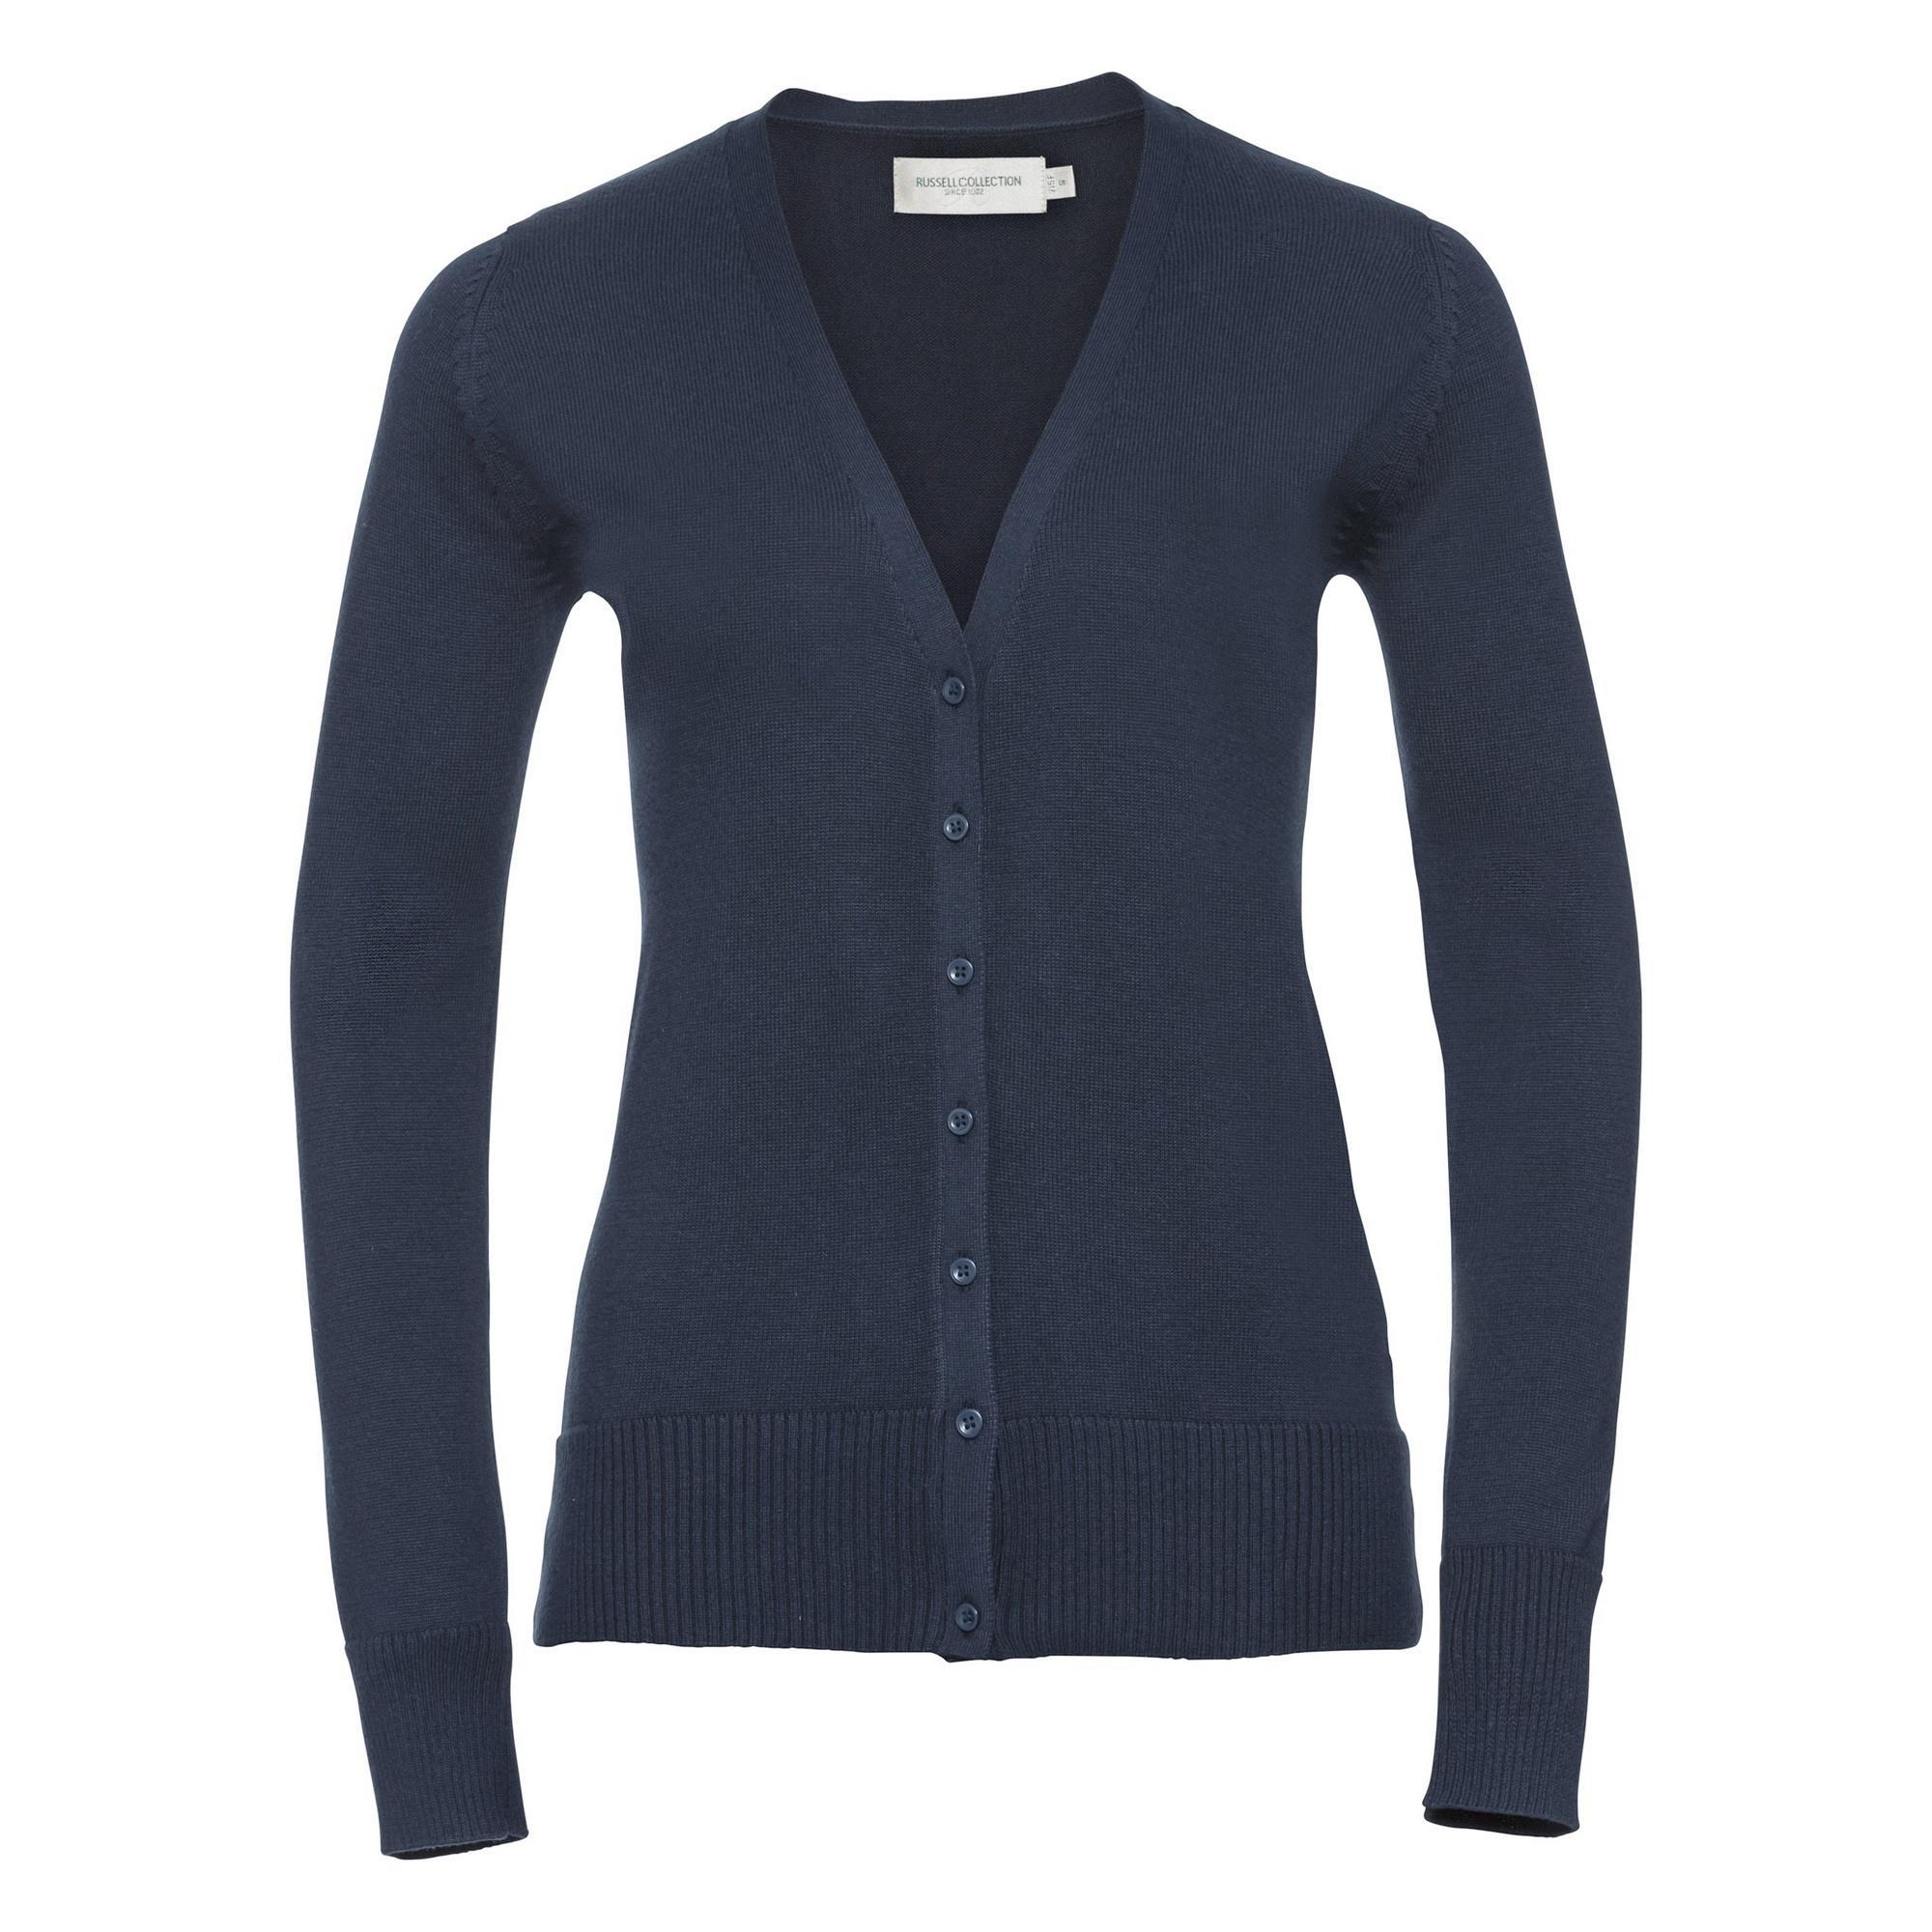 Russell Collection Ladies/Womens V-neck Knitted Cardigan (French Navy) (2XL)